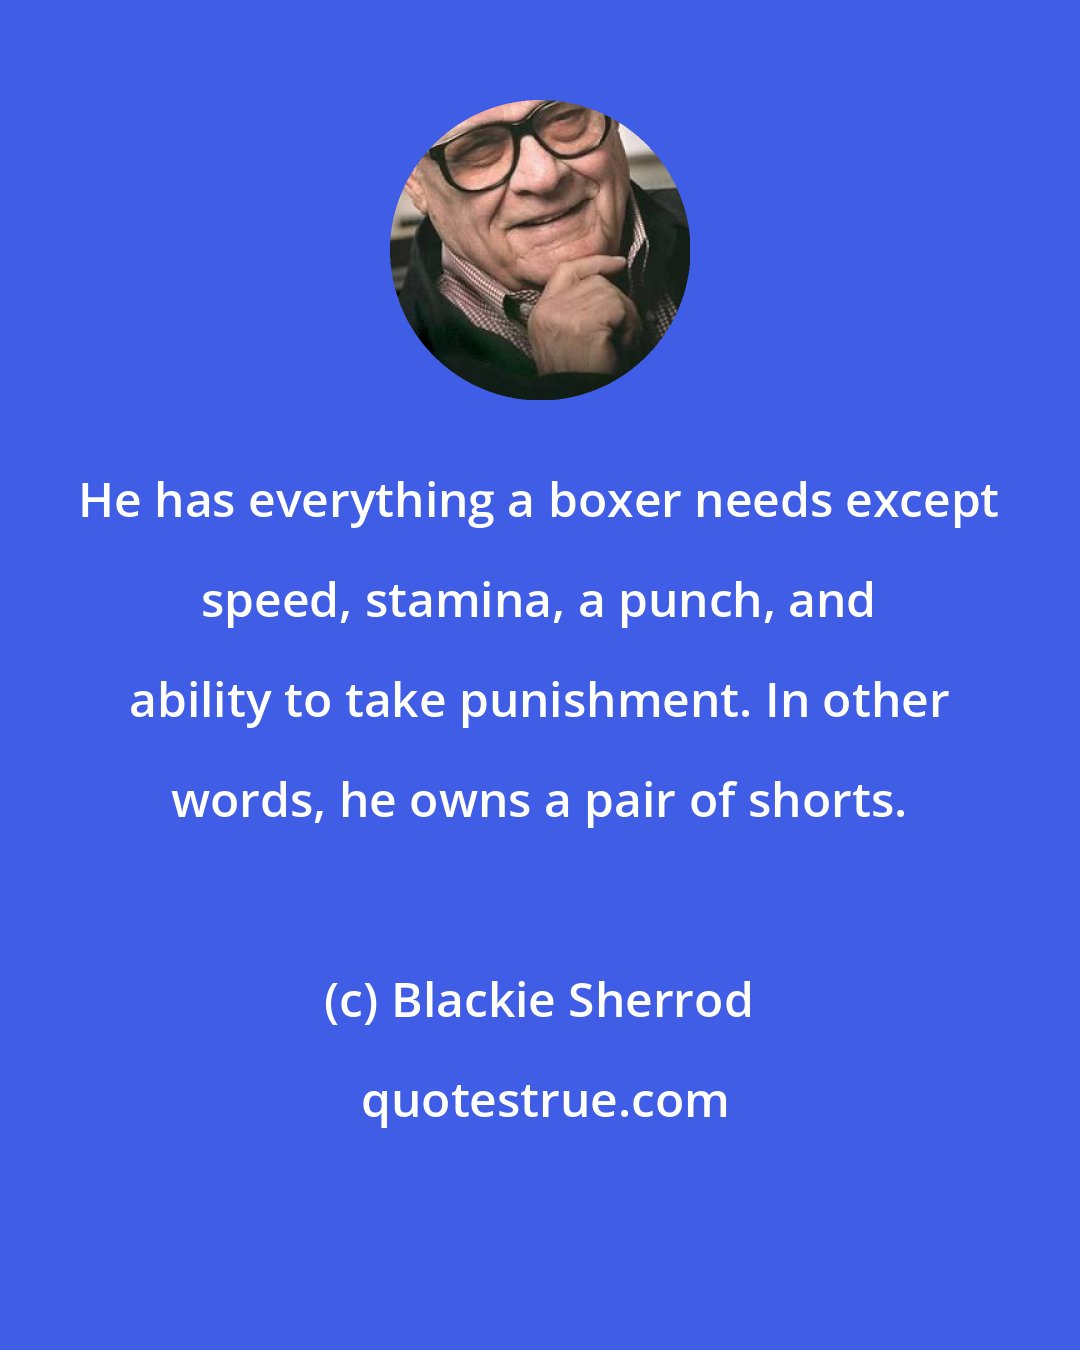 Blackie Sherrod: He has everything a boxer needs except speed, stamina, a punch, and ability to take punishment. In other words, he owns a pair of shorts.